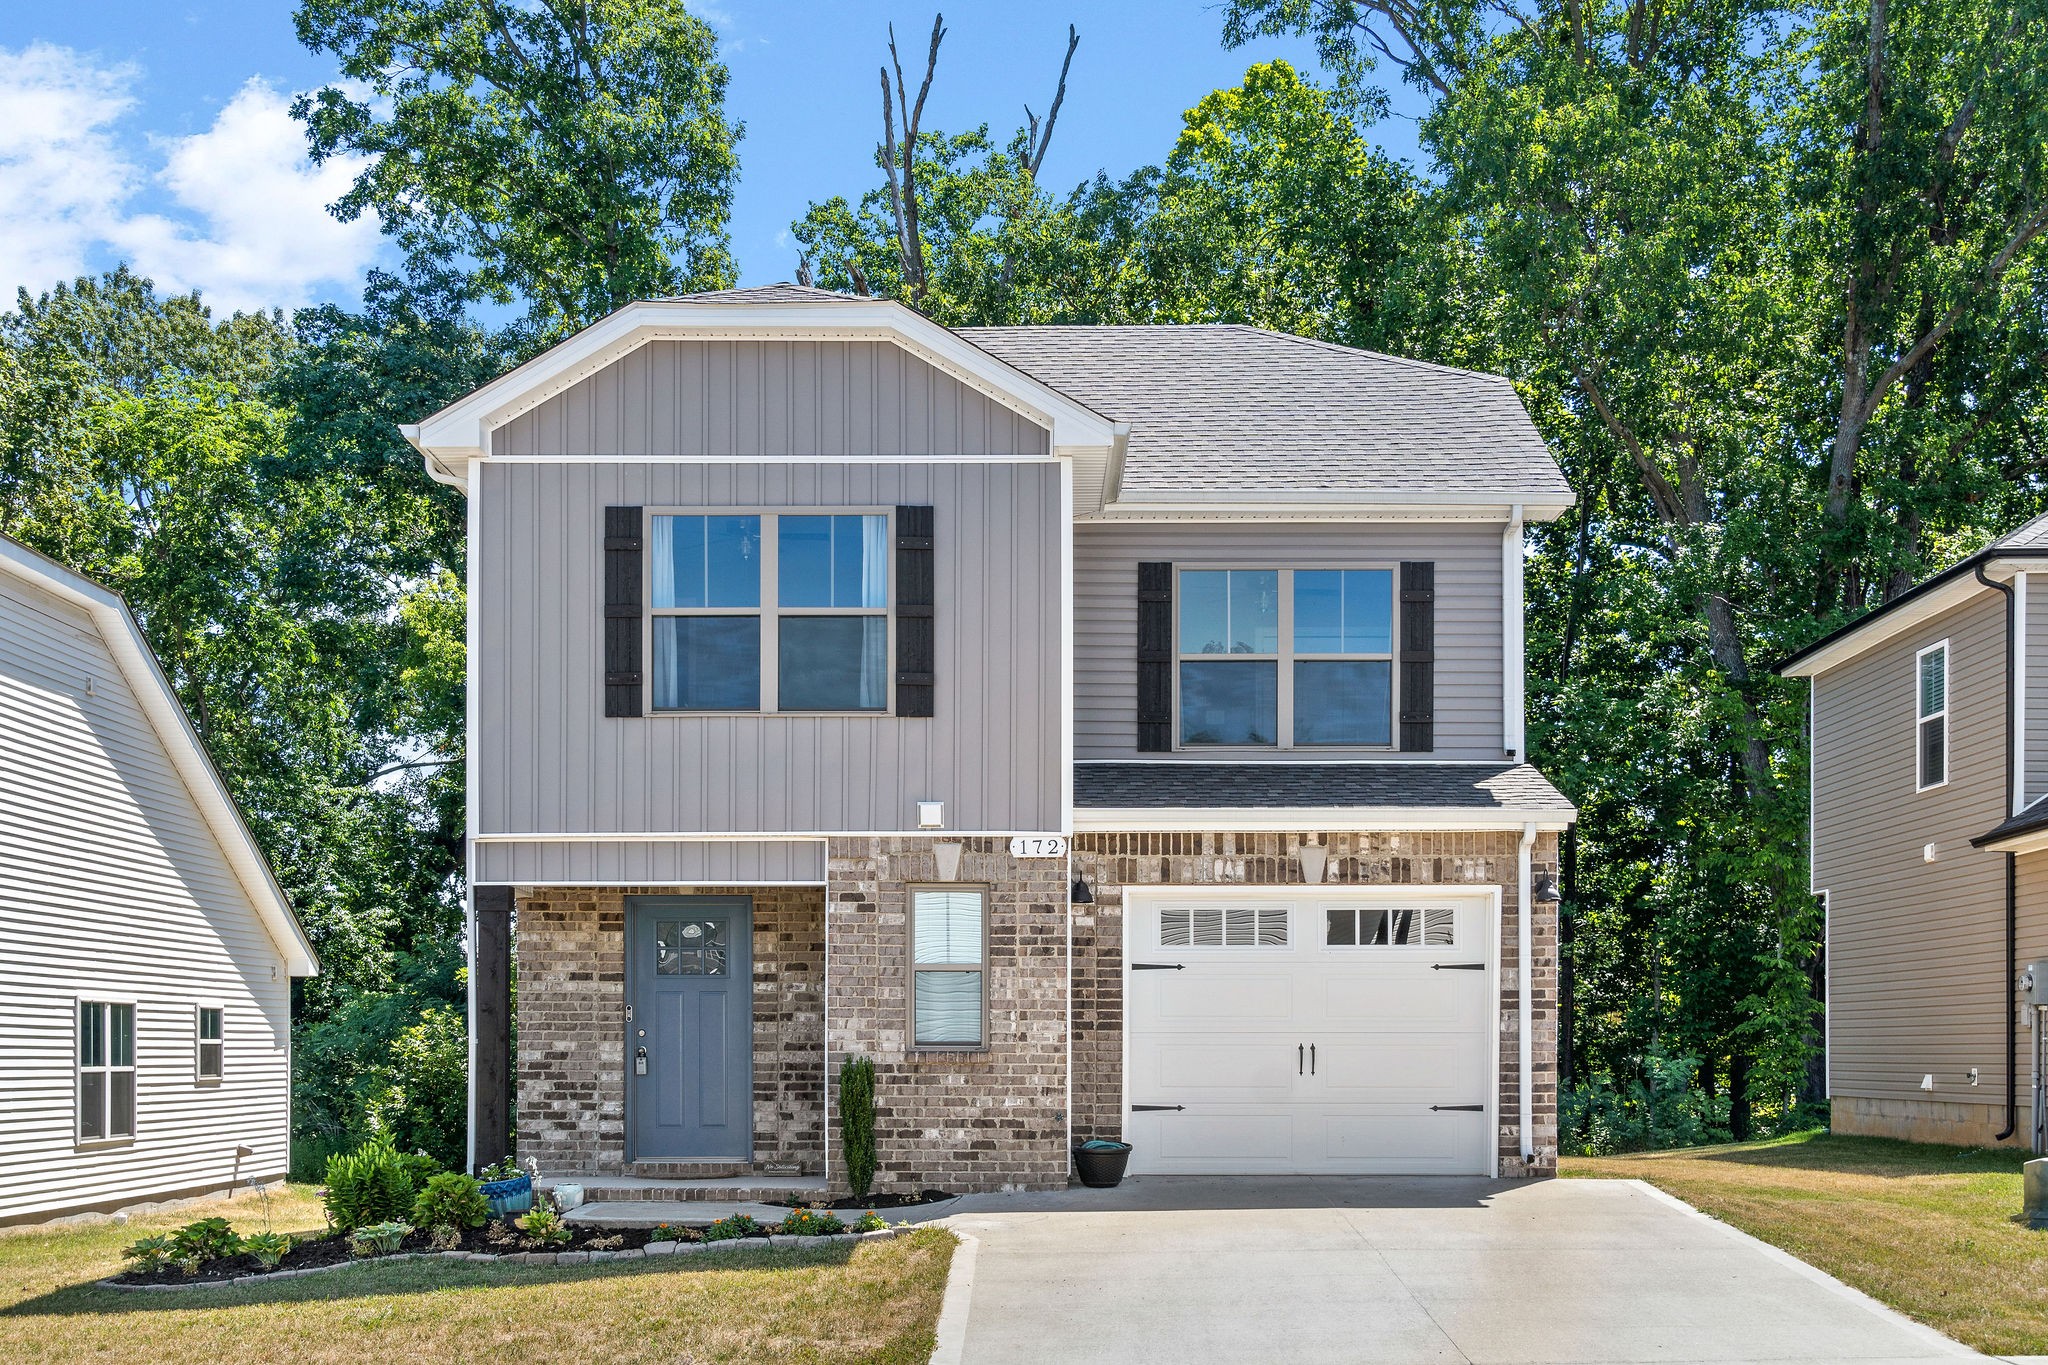 Welcome Home to 172 Waterwheel - Lancashire Floor Plan - White & Grey Cabinetry/Granite Counters/Stainless Steel Appliances Convey - Like NEW Home - Great Open Floor Plan Downstairs for Entertaining - Spacious 2nd Floor - Large Room Sizes - This is a MUST SEE!